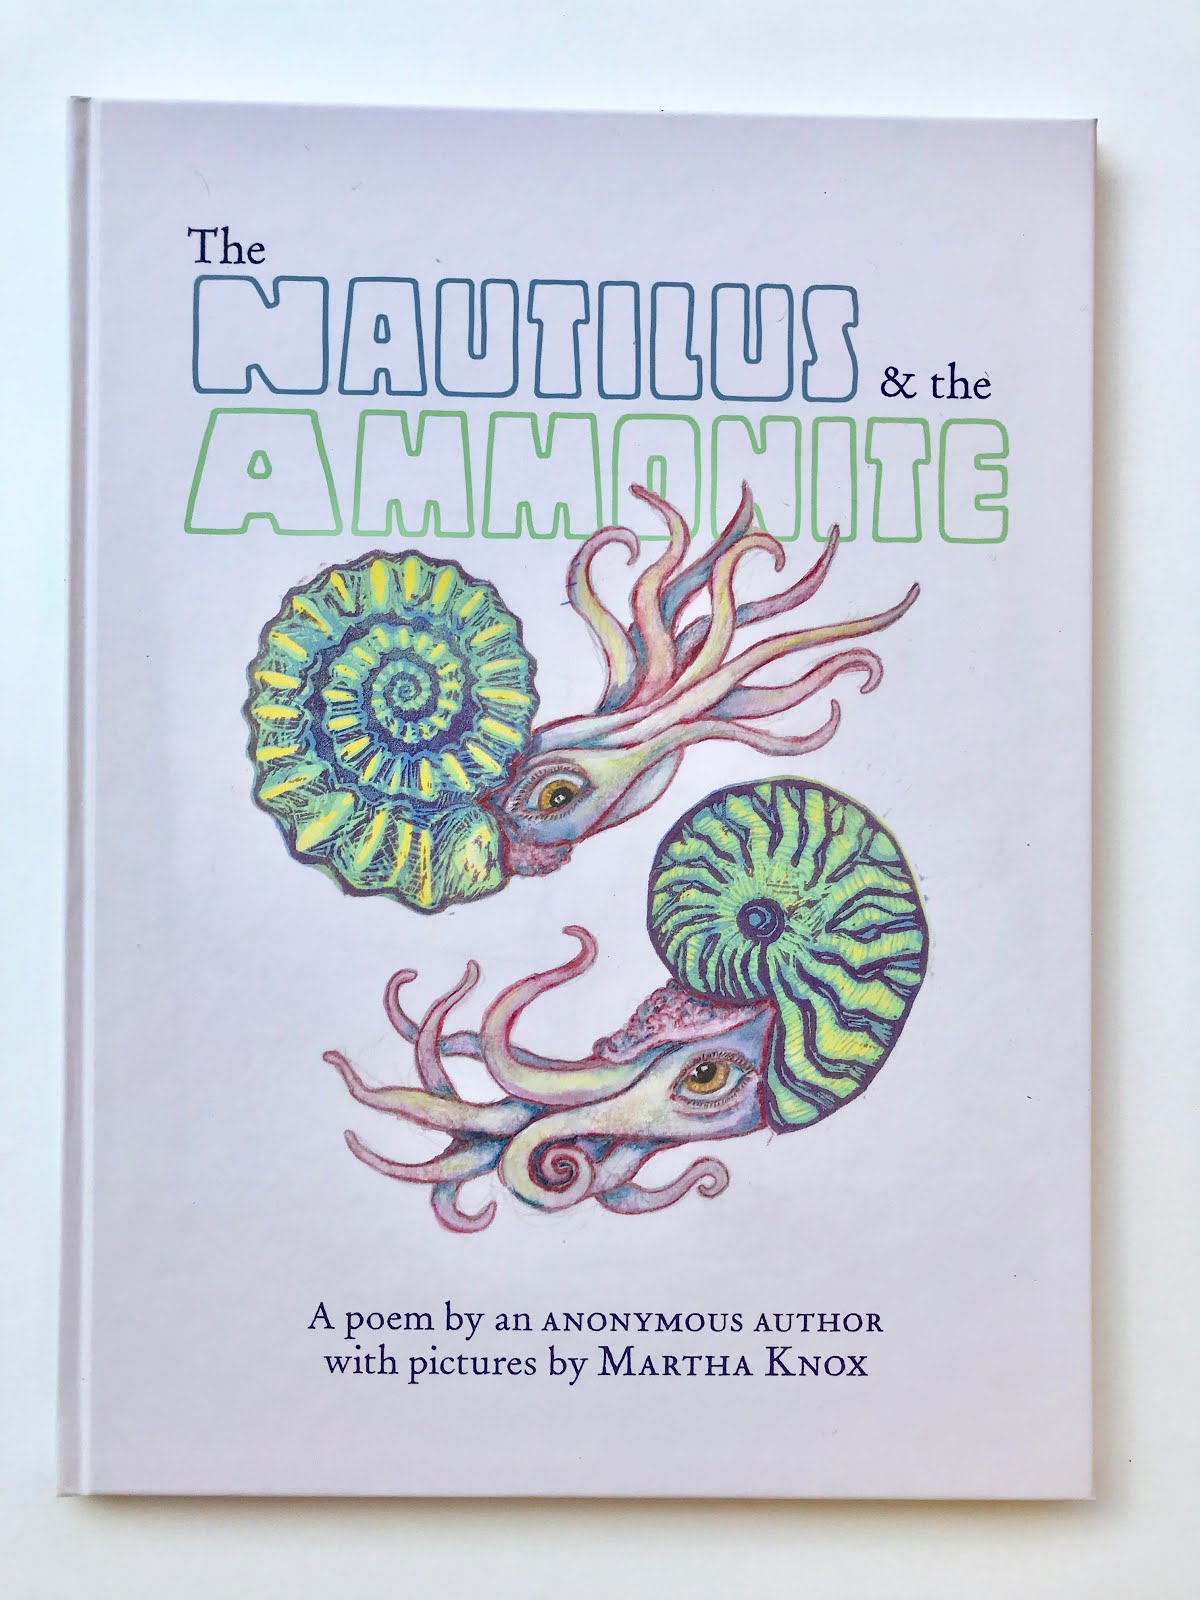 The Nautilus and Ammonite is now for sale!